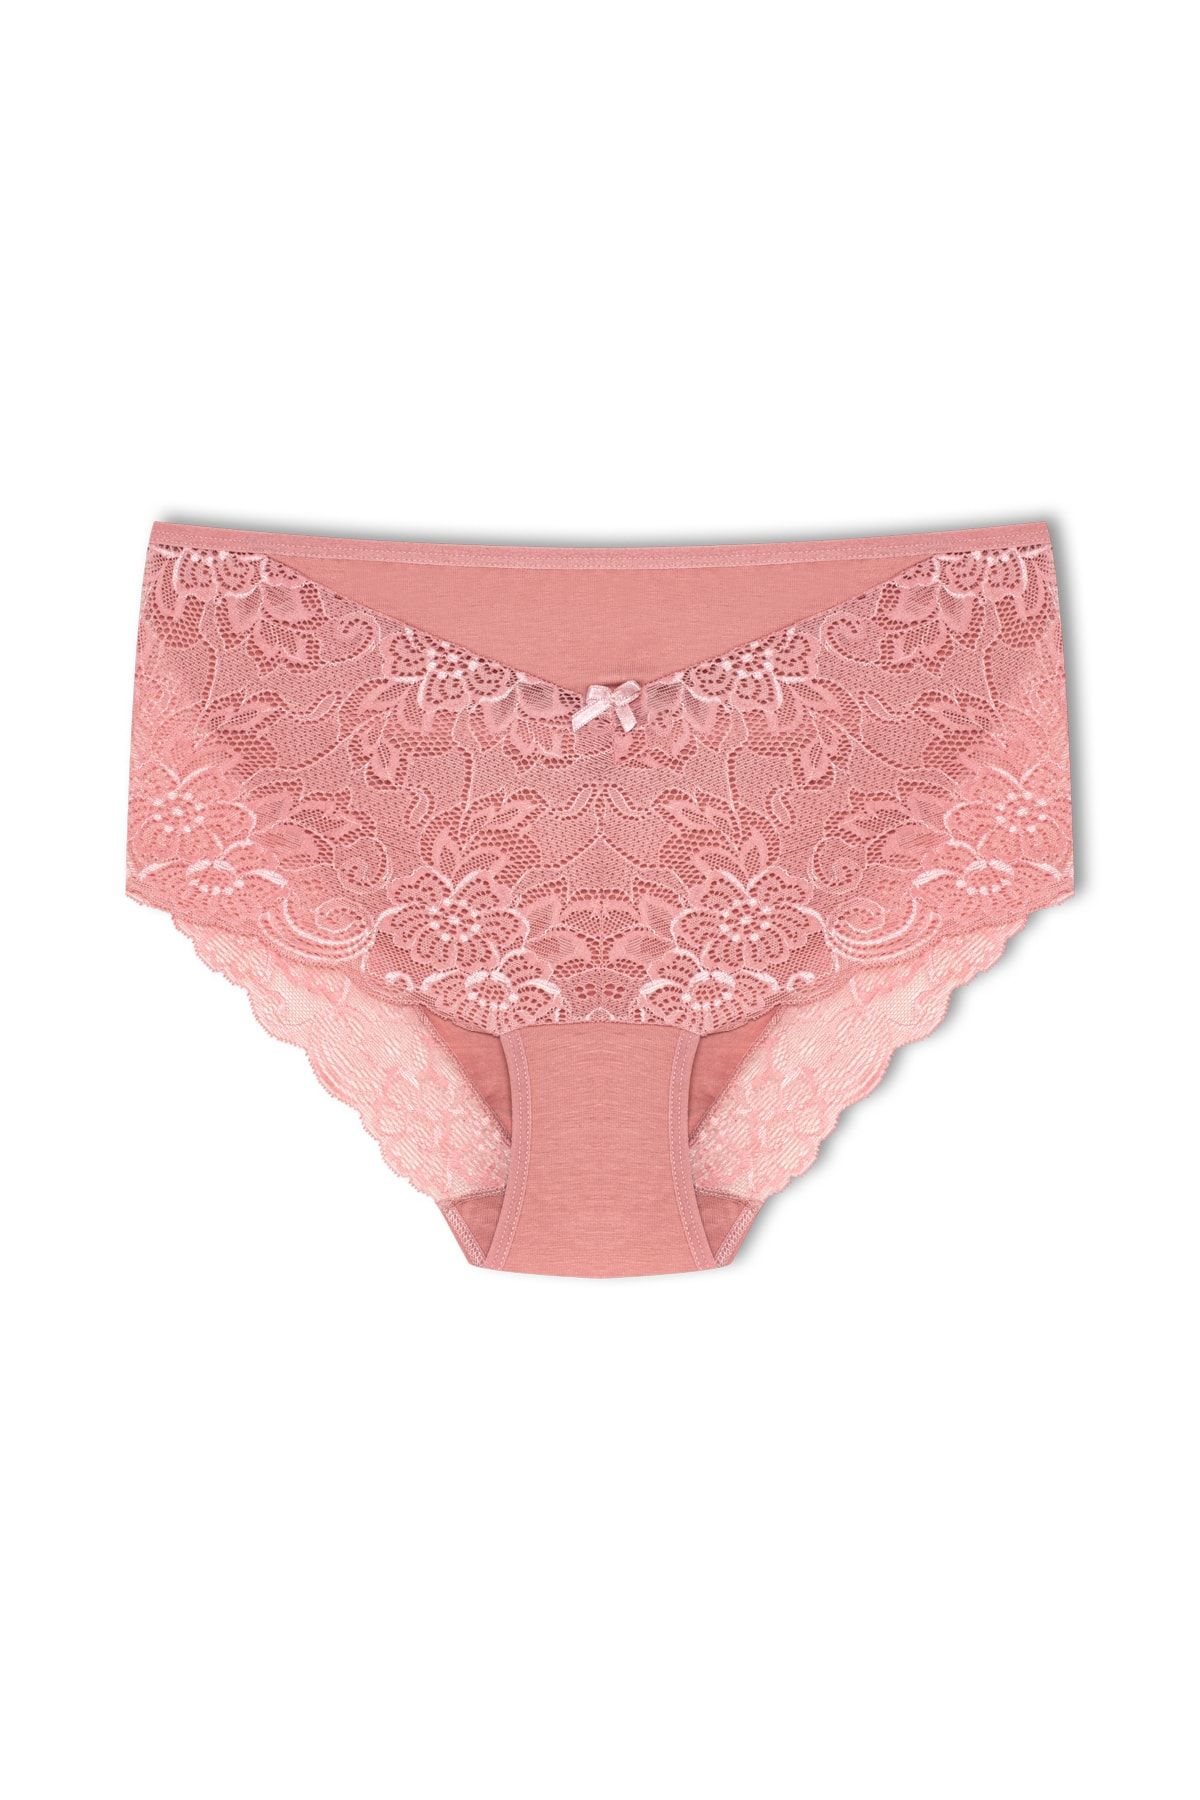 HNX 4-Piece Large Size Cotton Bato Women's Panties with Lace Front and Back  - Trendyol